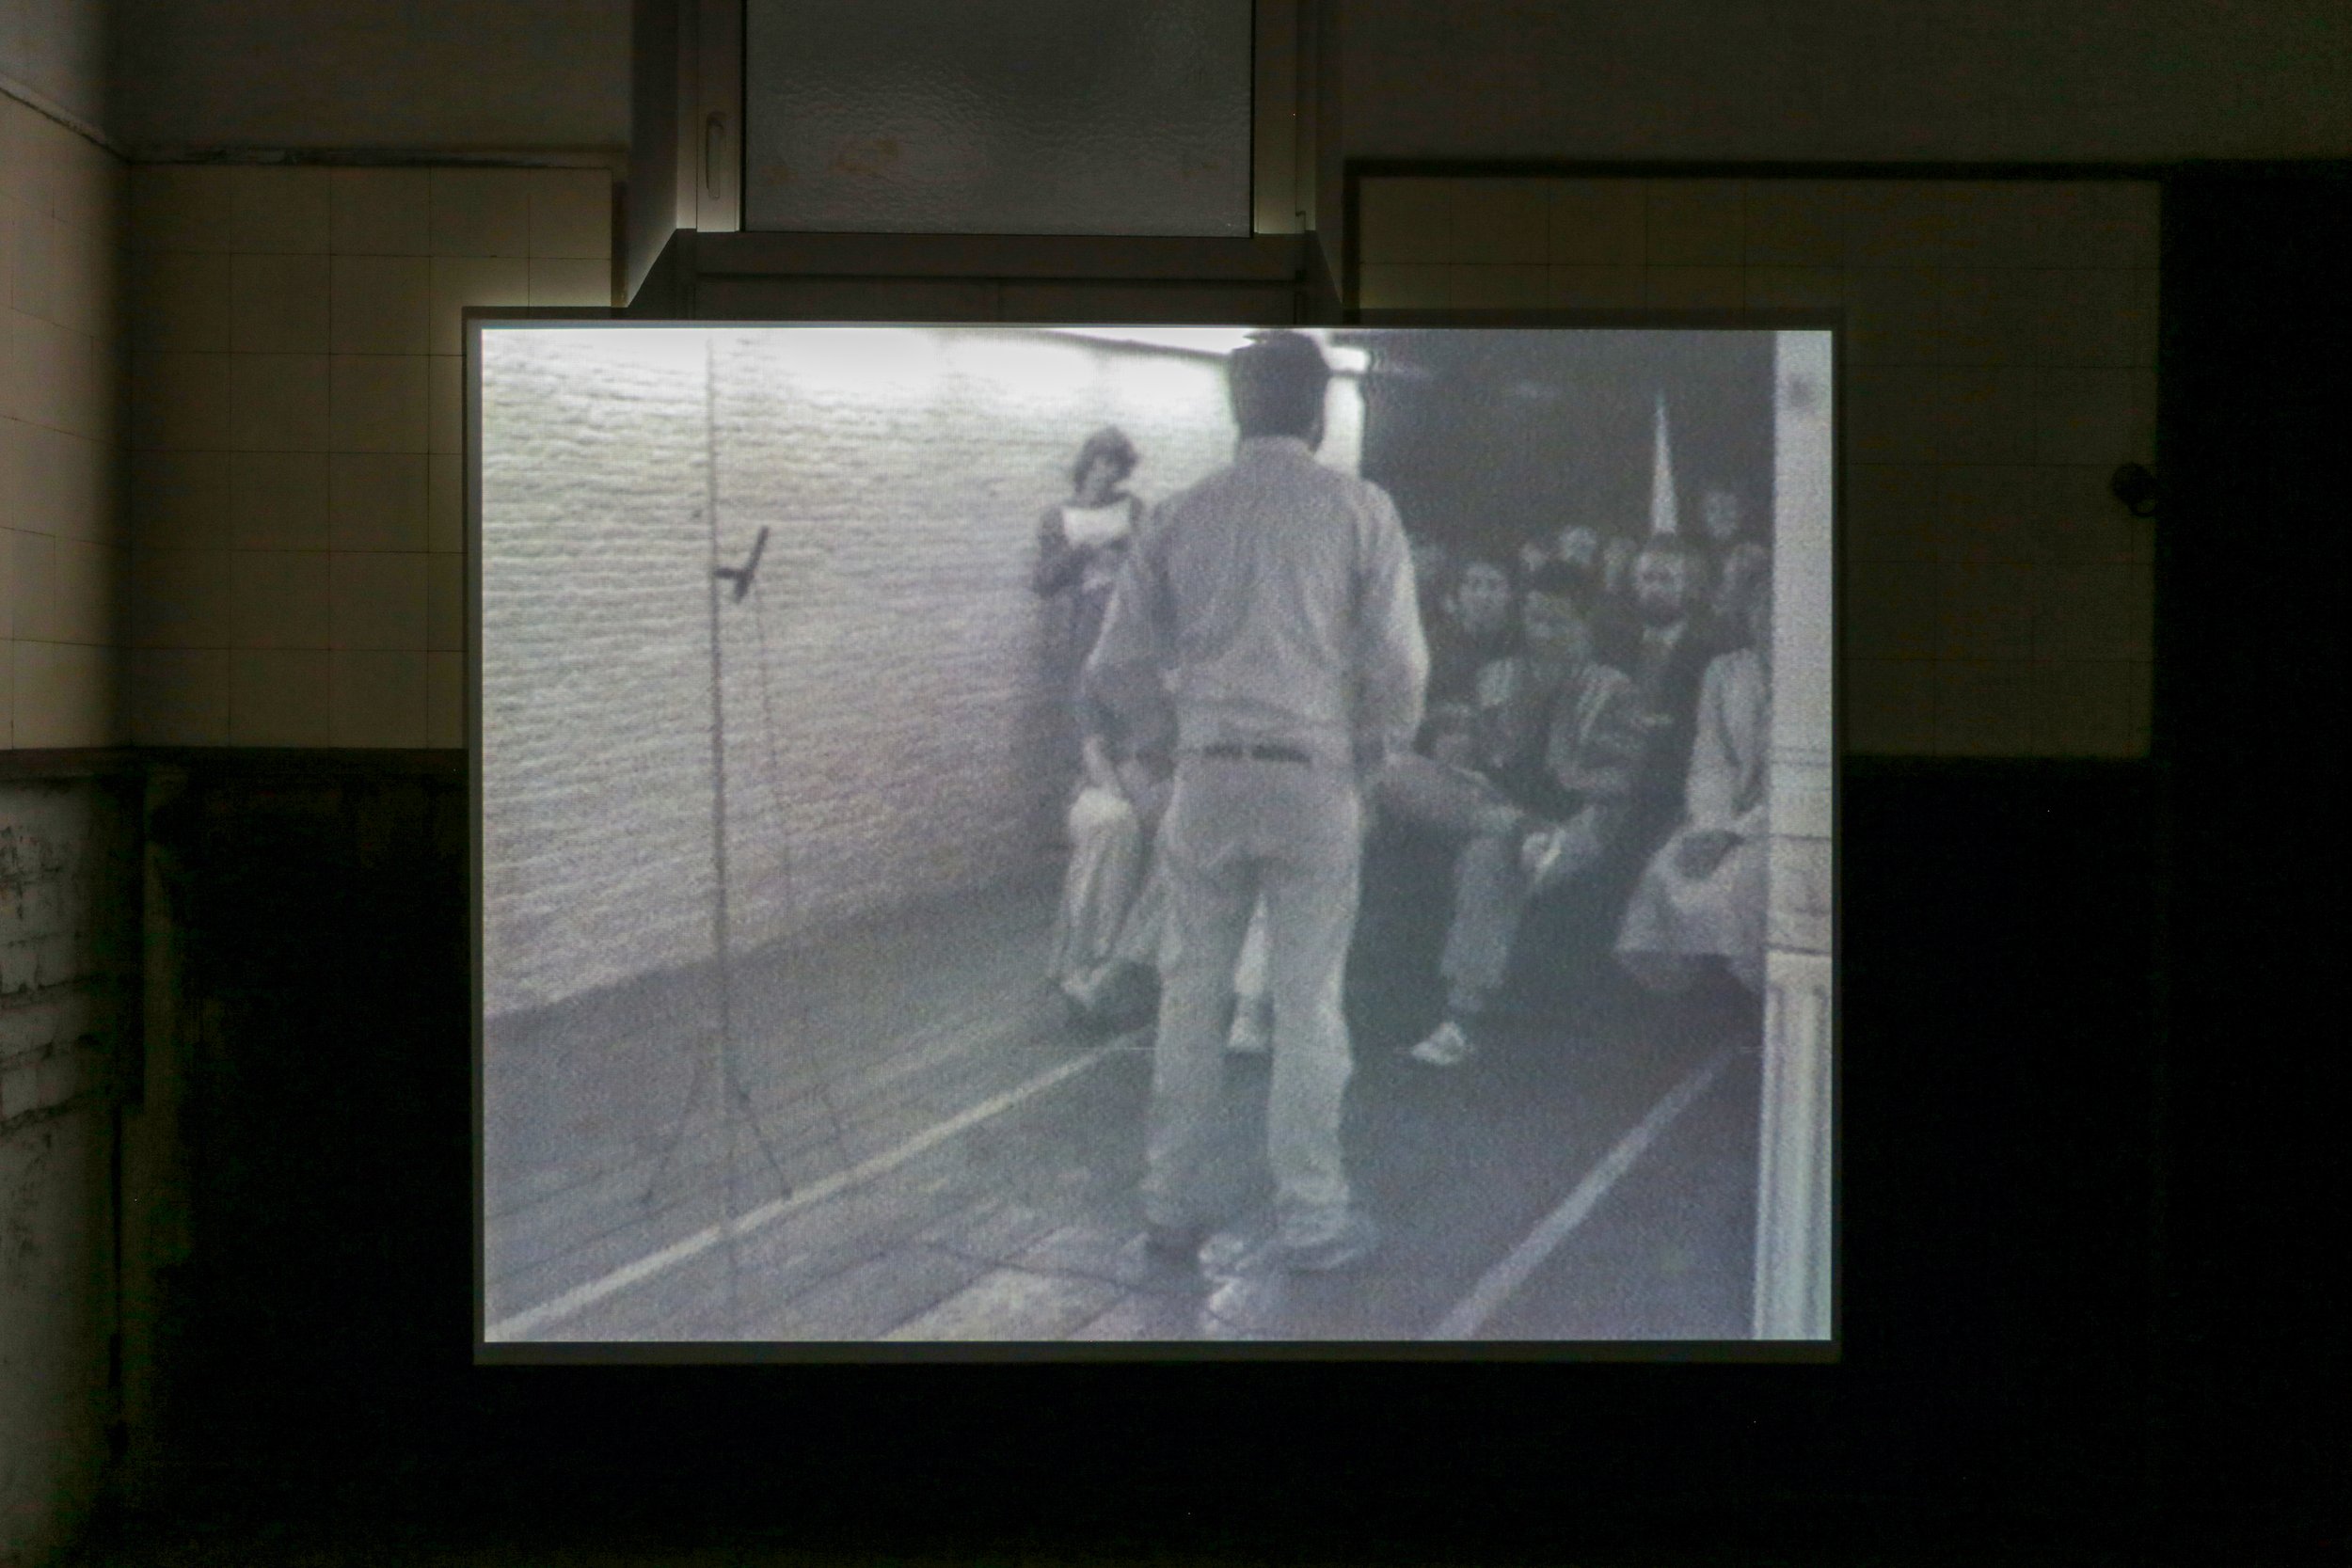   fig7 installation view Dan Graham, Audience/Performer/Mirror, 1977, 00:17:45., In collections: De Appel, LIMA  